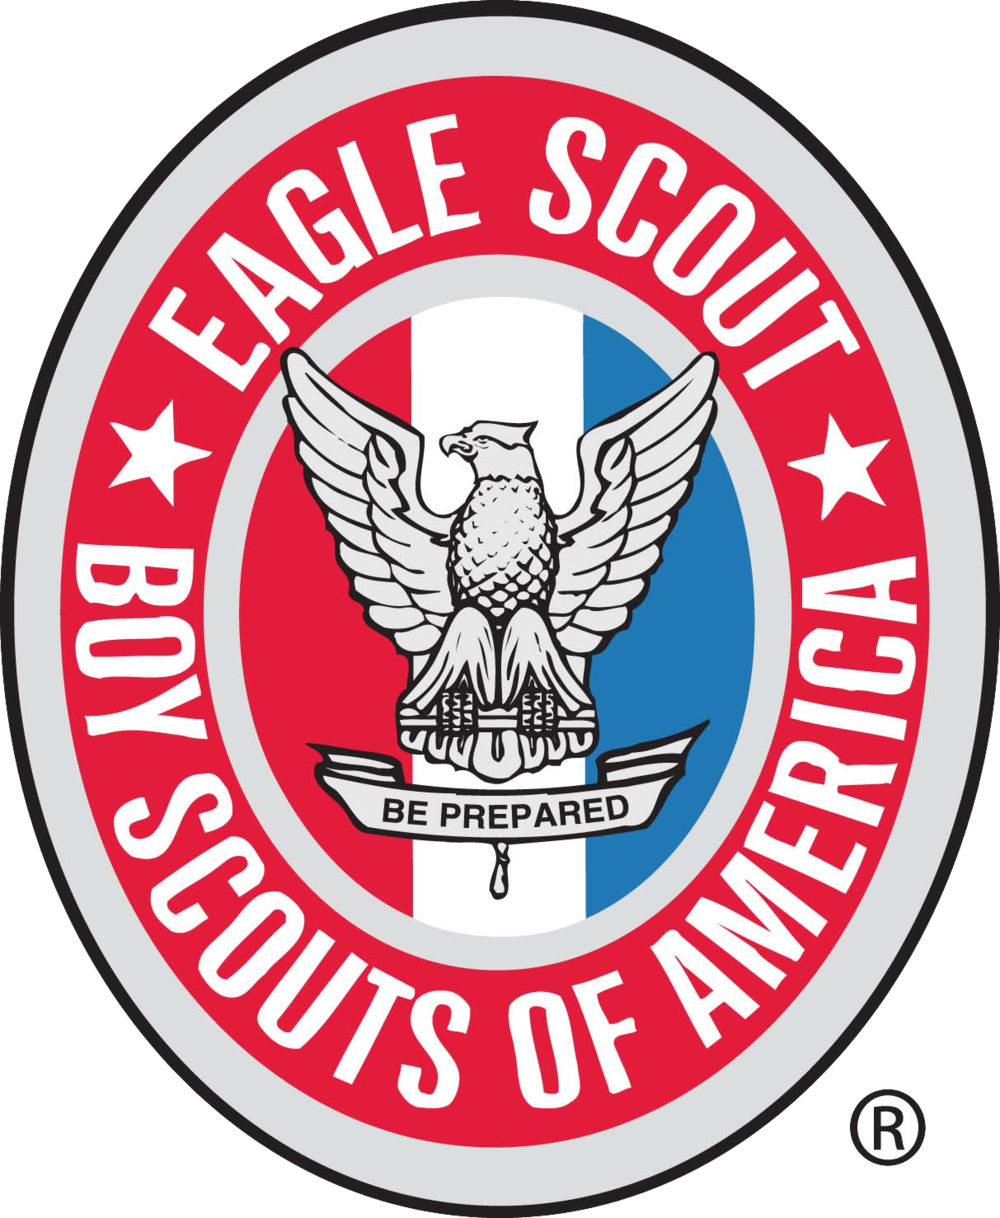 EagleScout.png